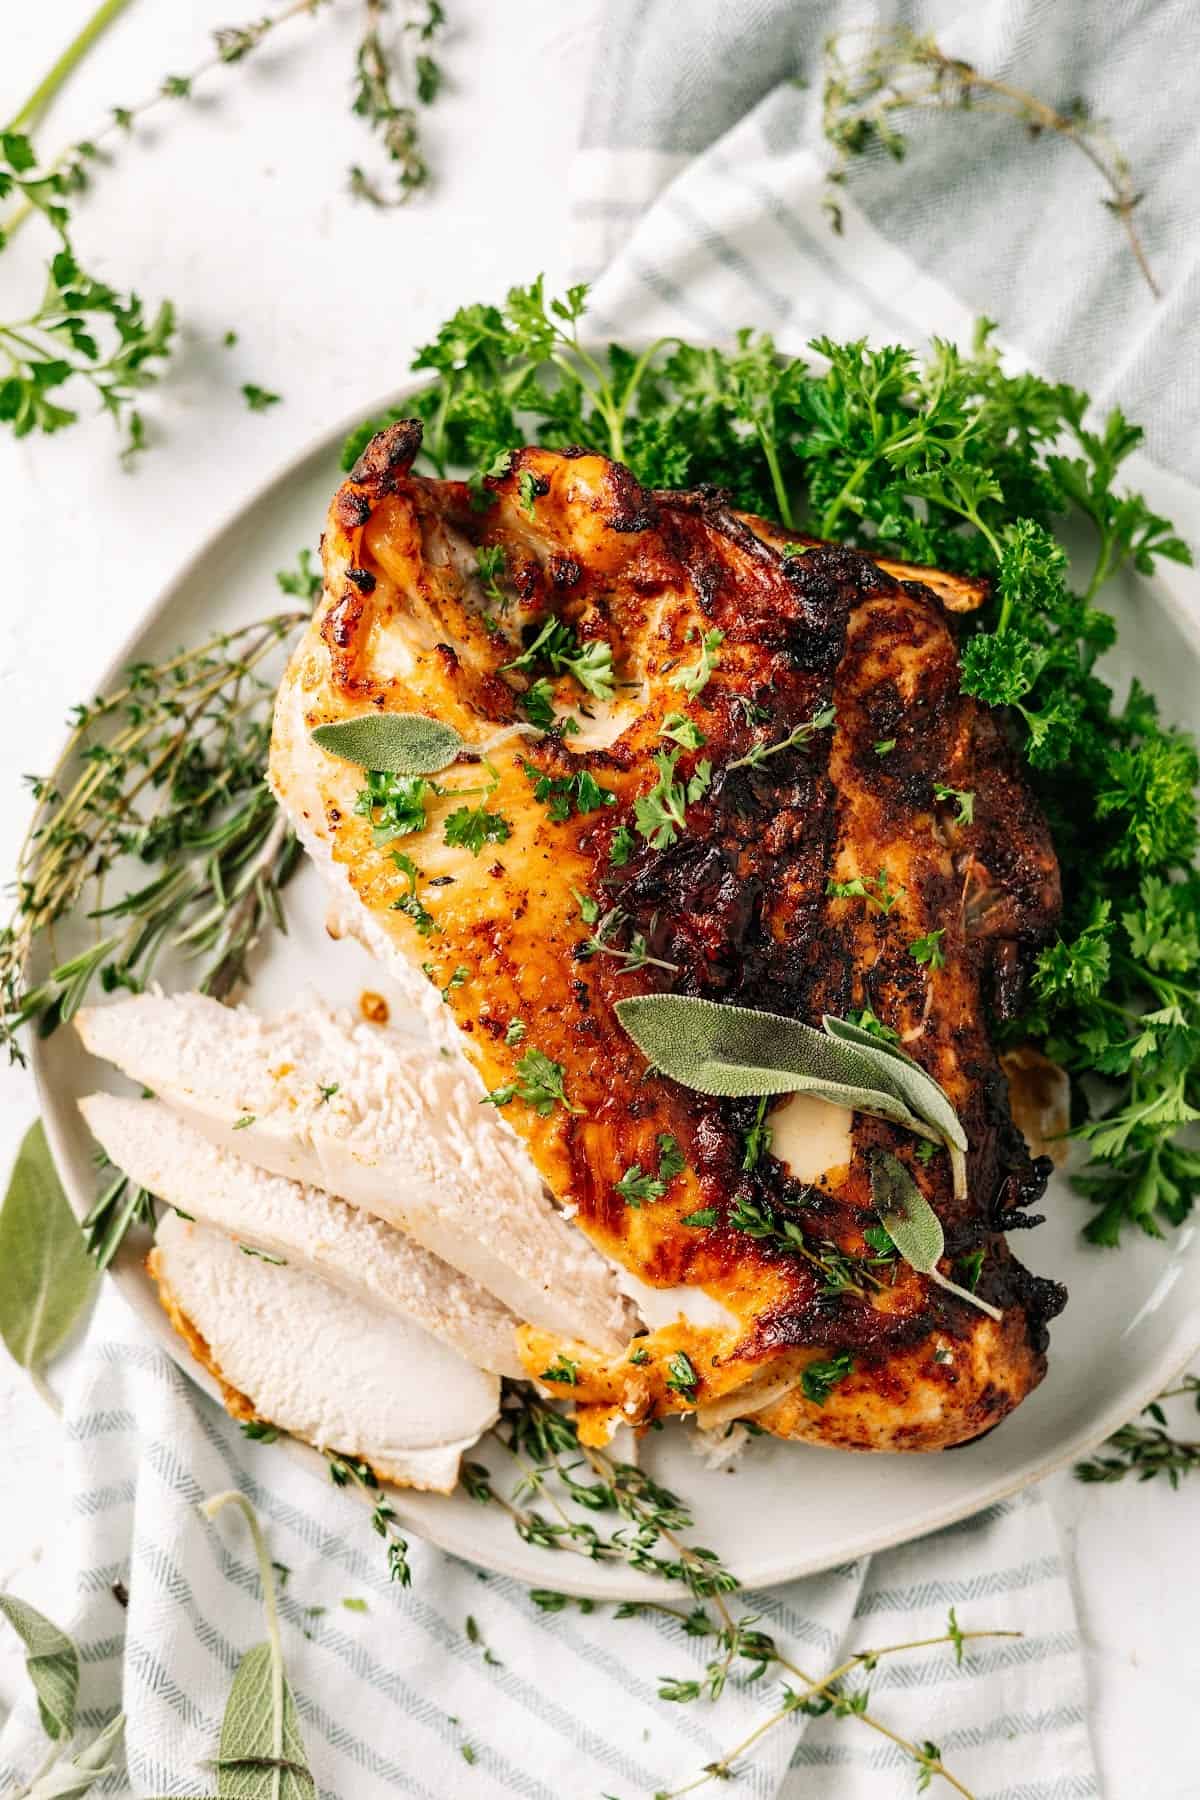 Overhead view of a turkey breast on a plate, with the end cut into slices, covered in herbs